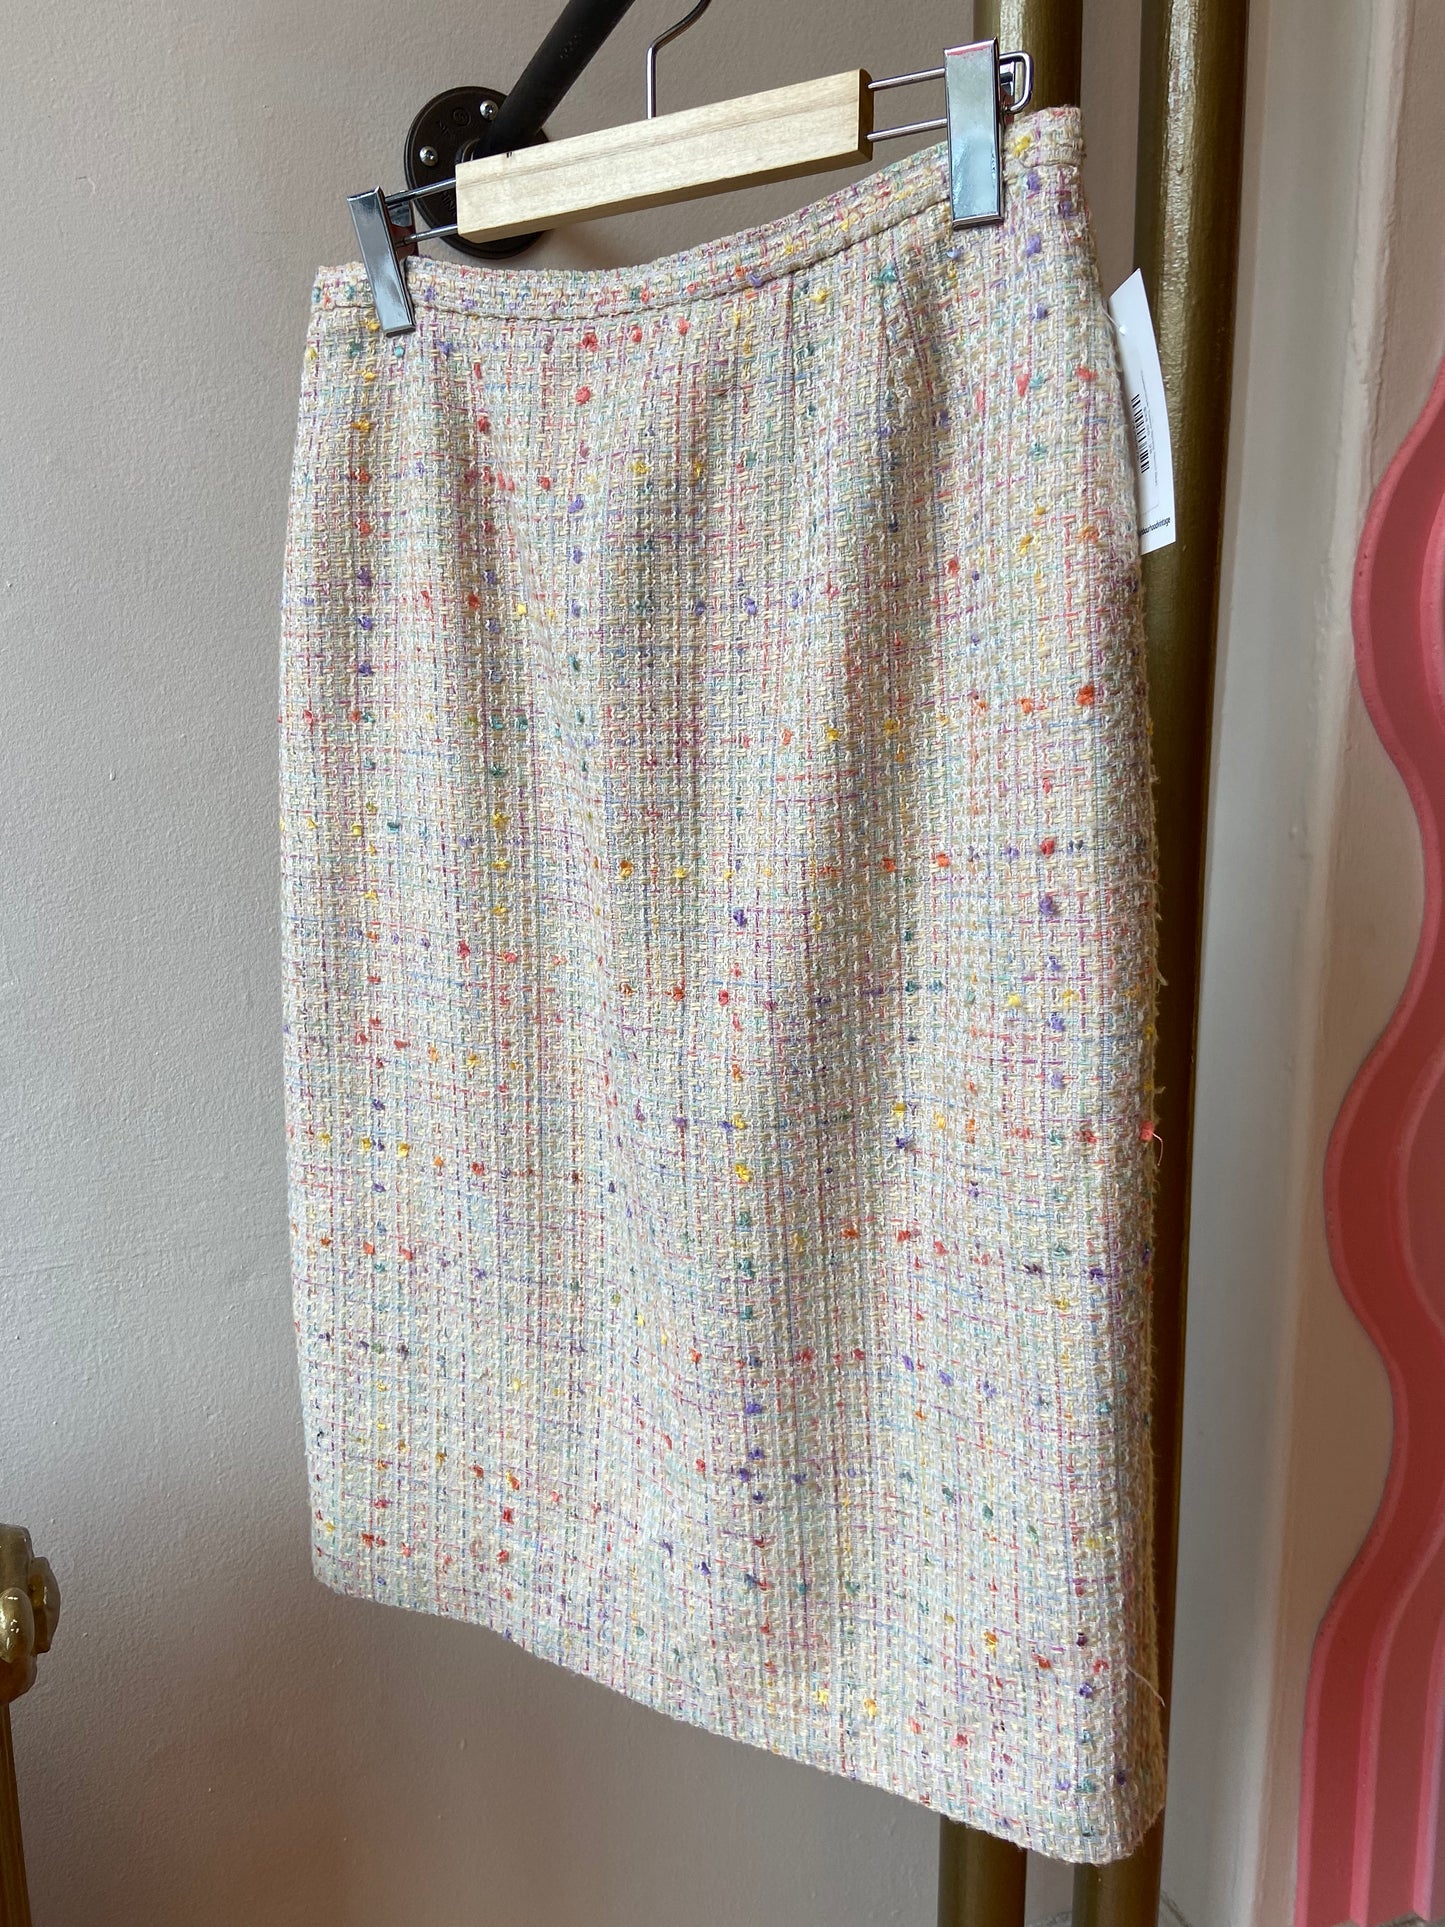 Chanel-style Tweed Spring Pencil Skirt